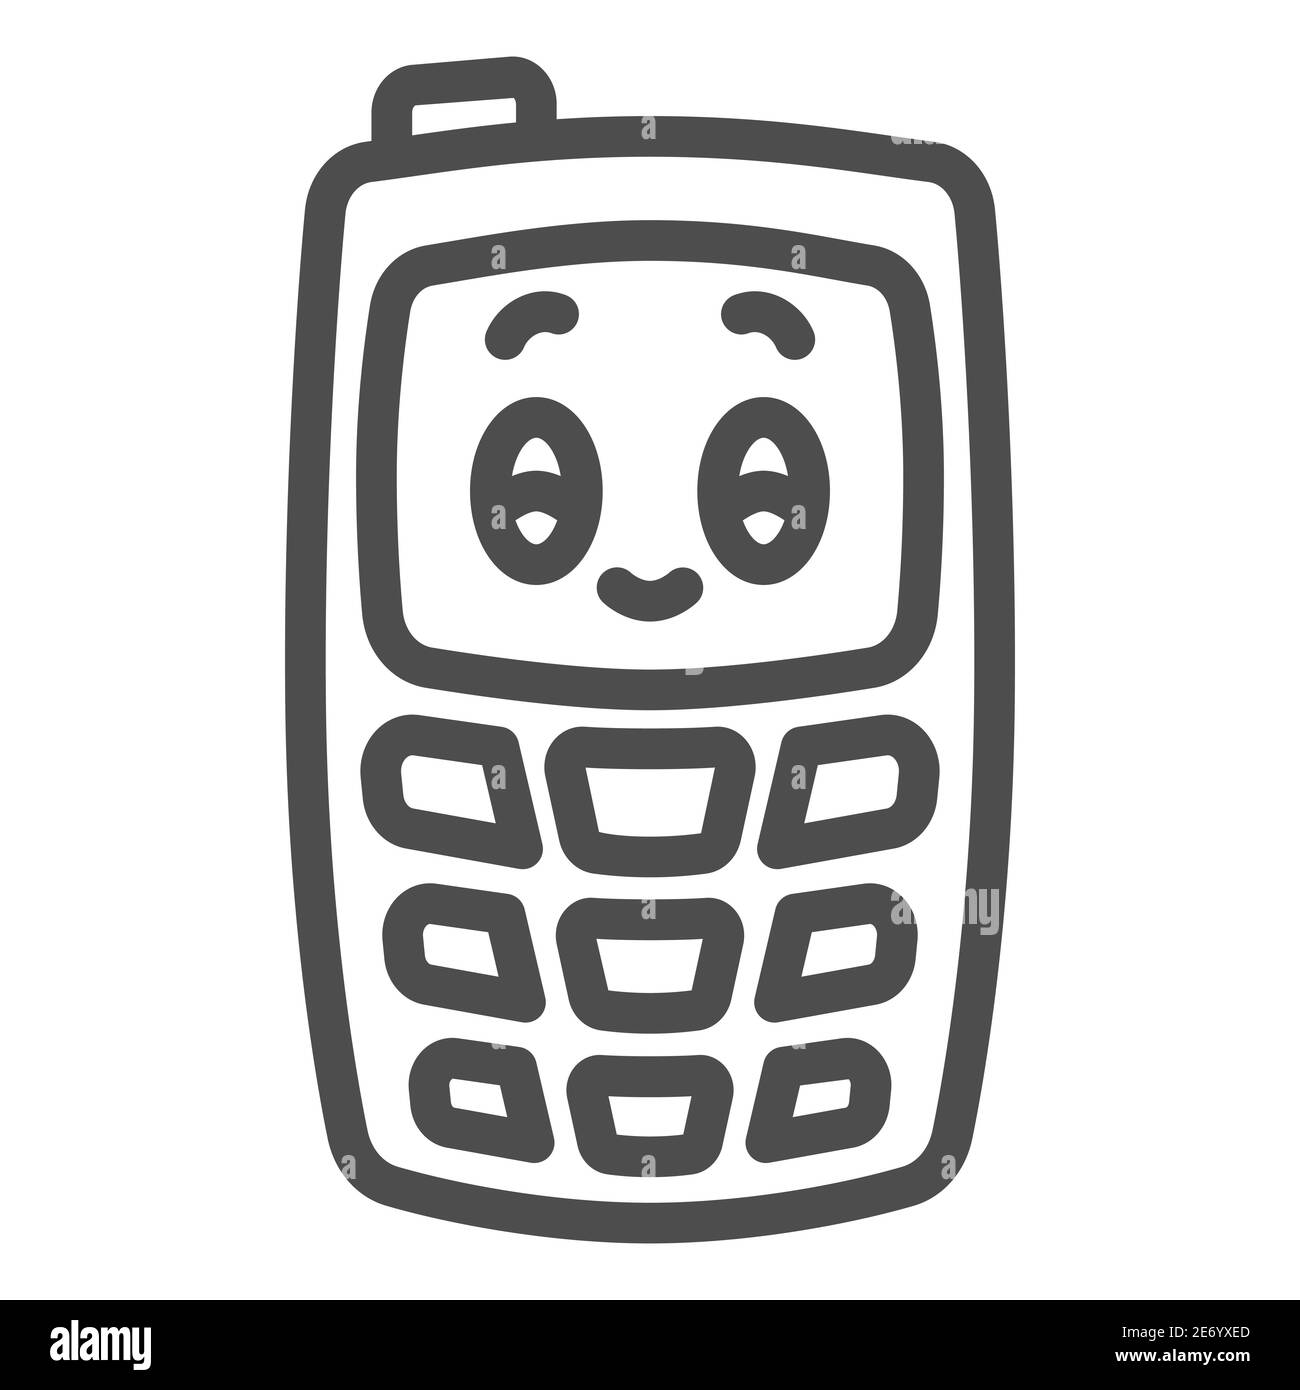 Children mobile phone line icon, Kids toys concept, Children walkie-talkie or cell phone sign on white background, Phone toy icon in outline style for Stock Vector